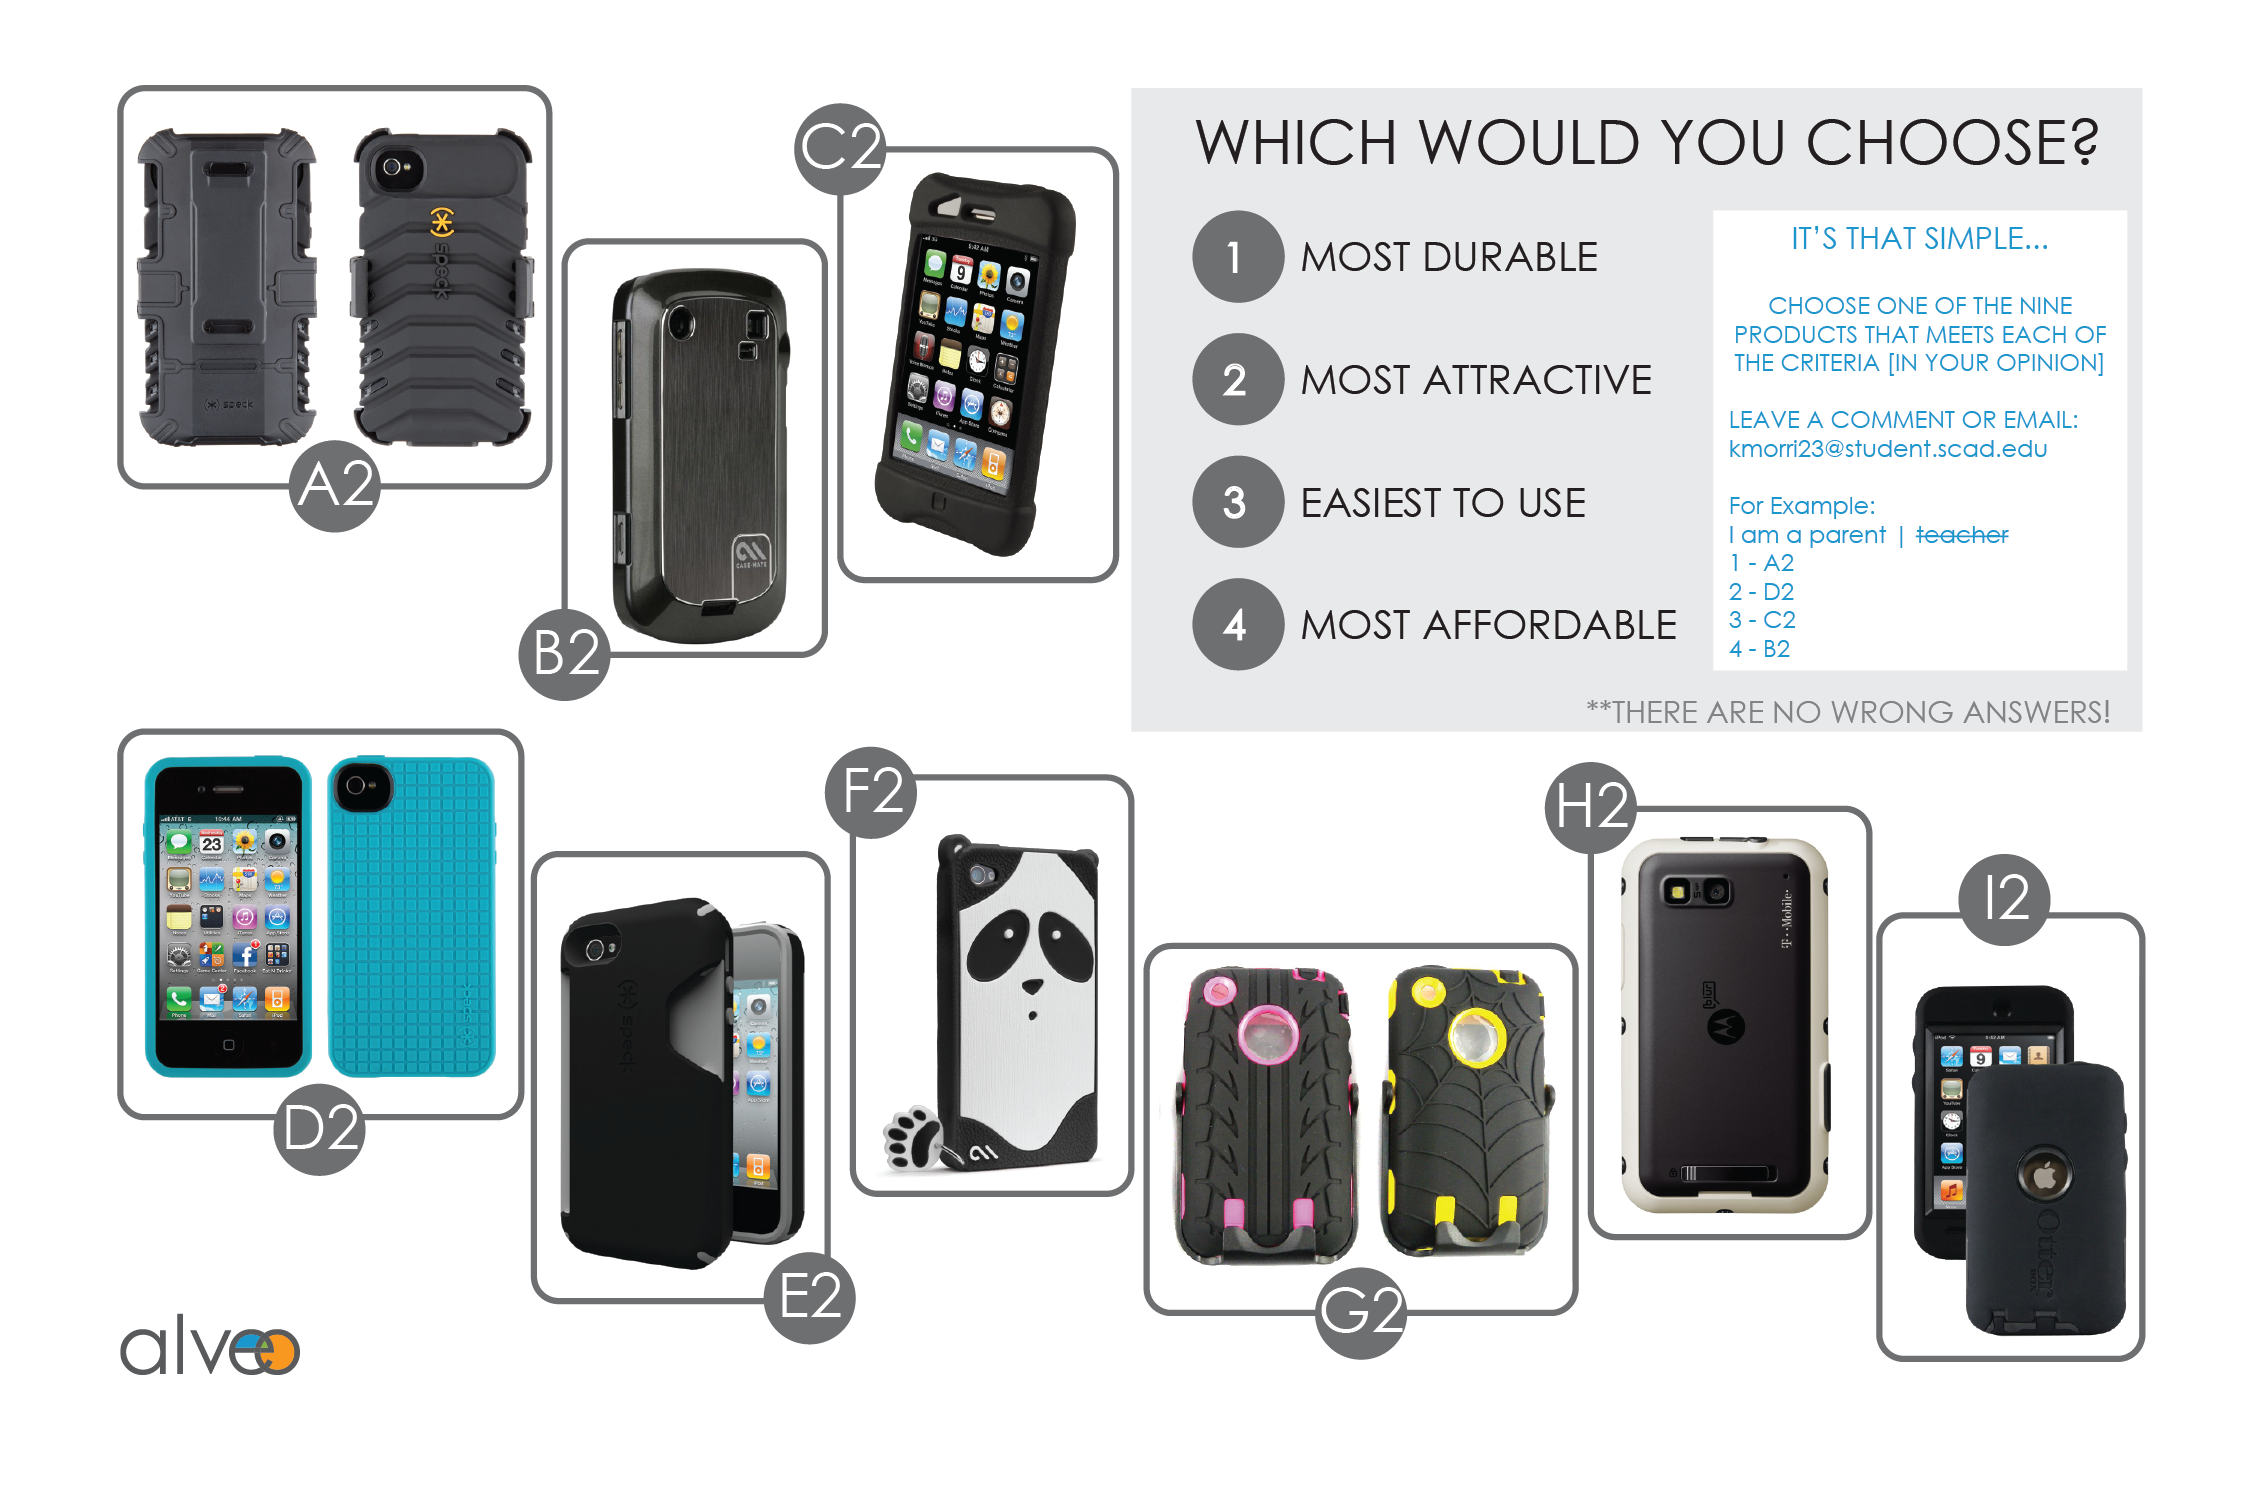   Image Board 2 - smart phone cases  